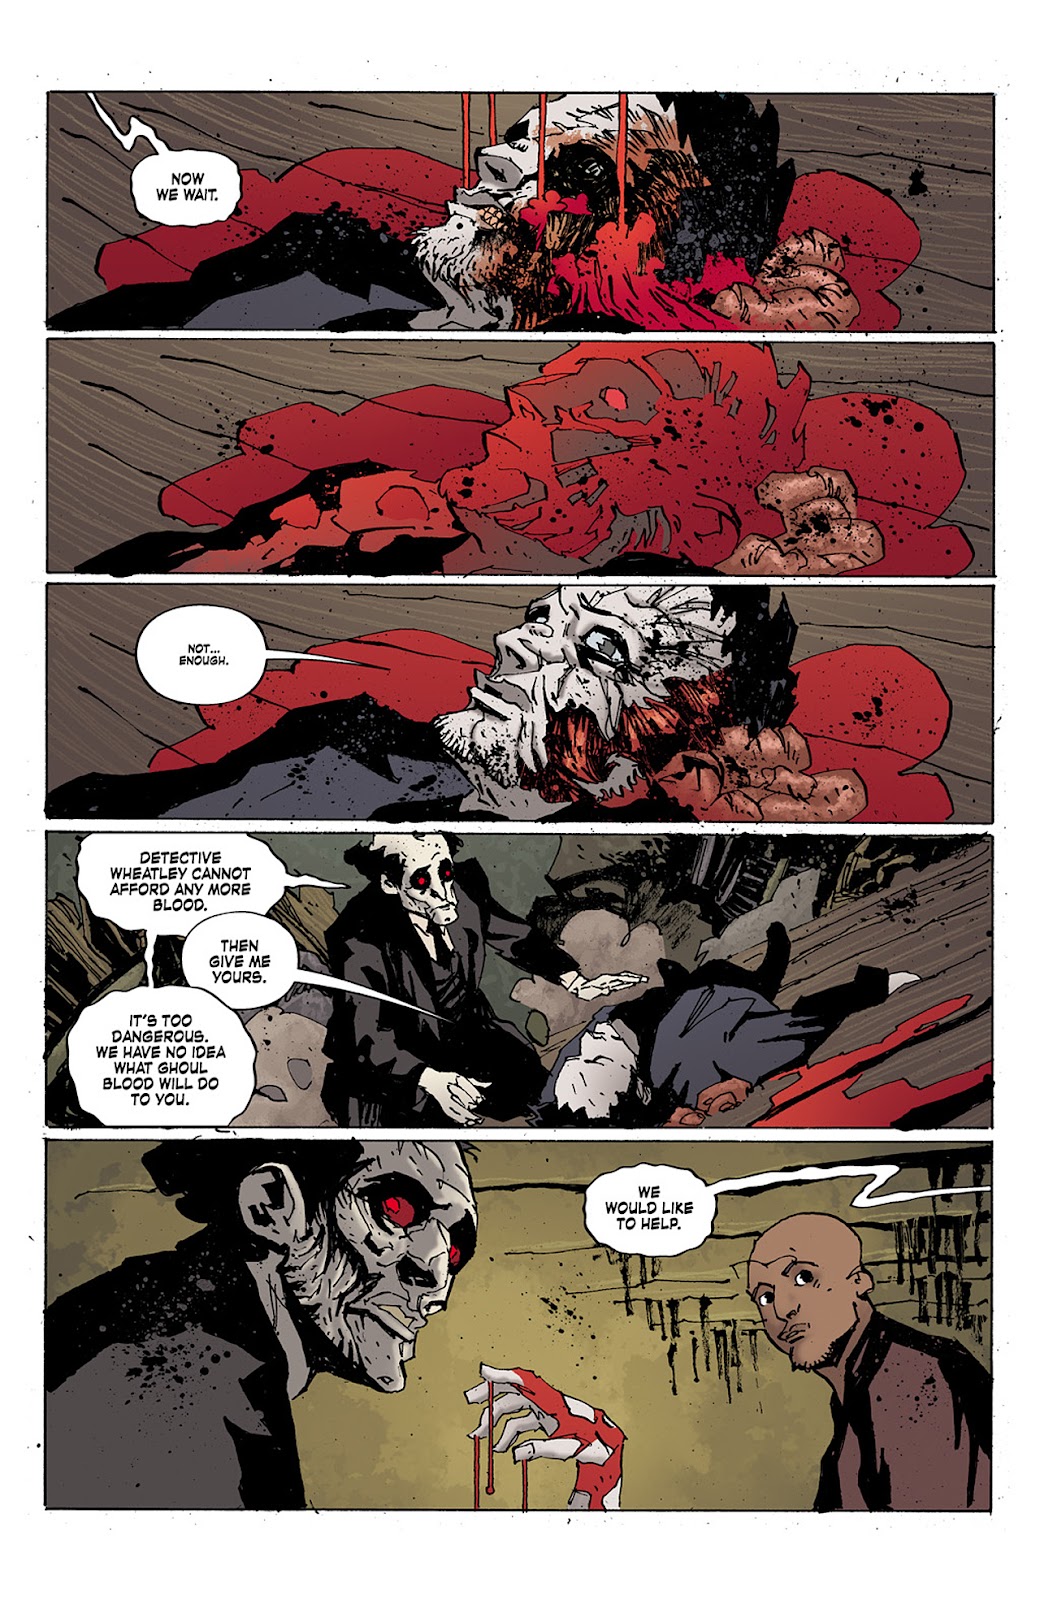 Criminal Macabre: Final Night - The 30 Days of Night Crossover issue 4 - Page 7